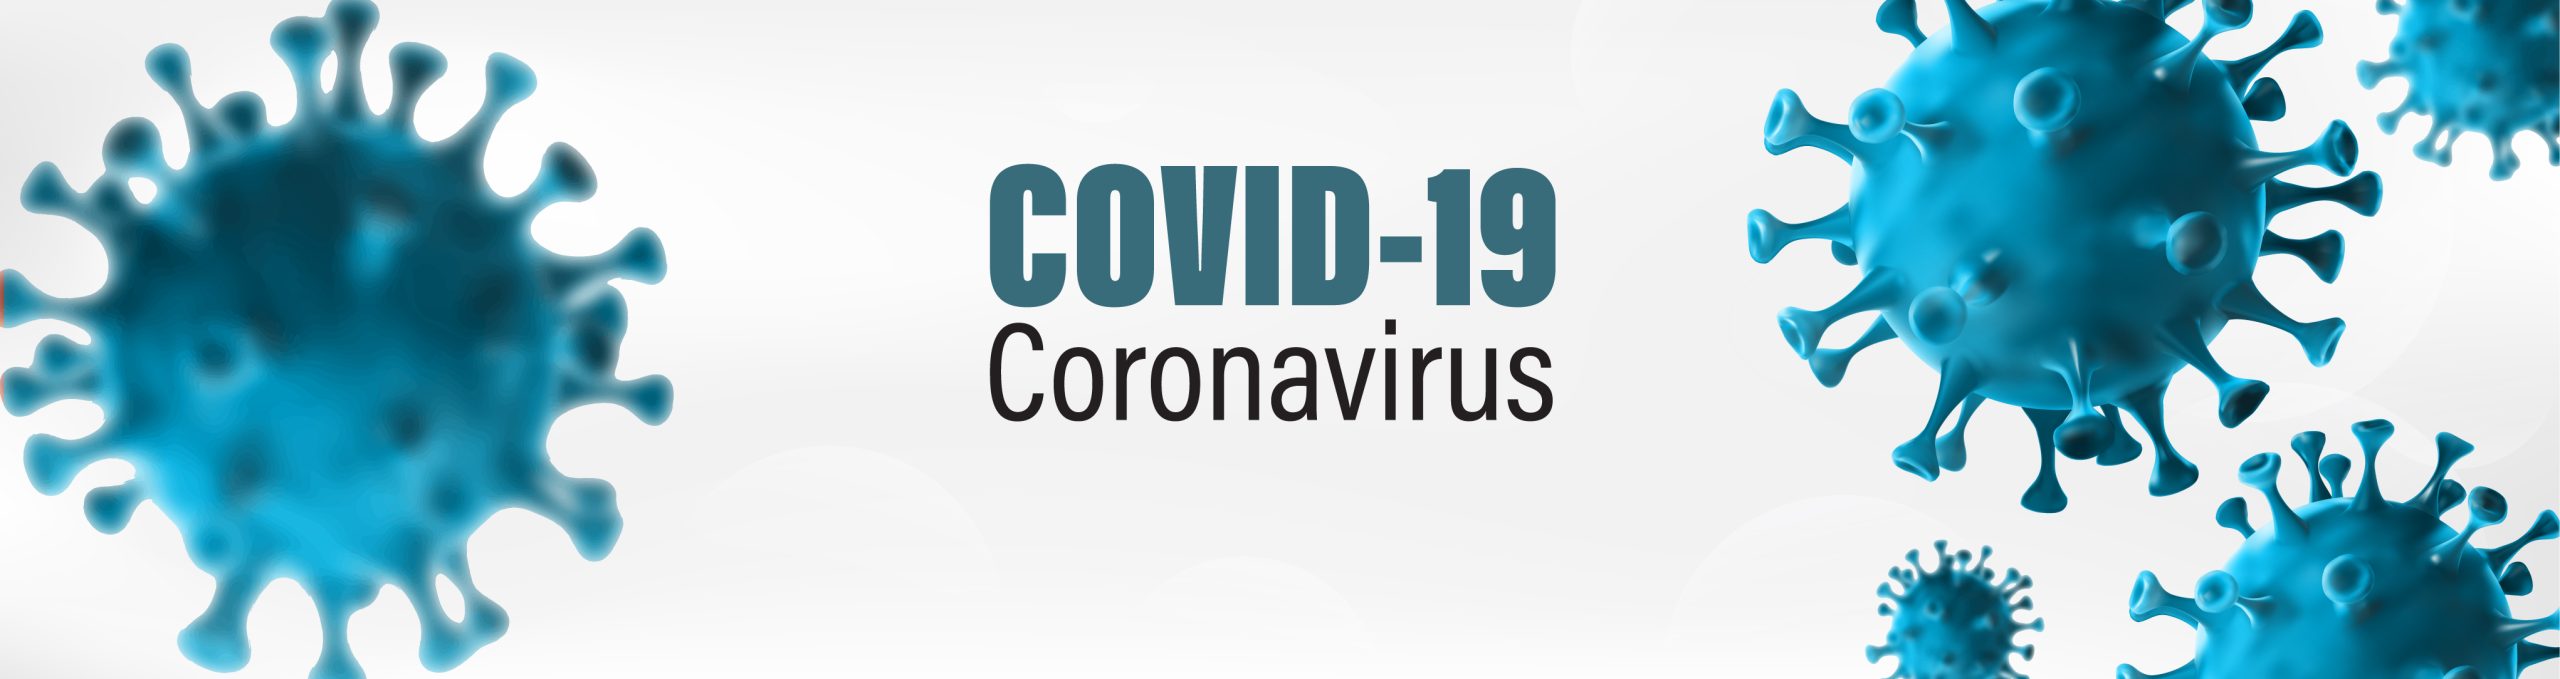 How to Clean and Disinfect Your Home Against COVID-19?